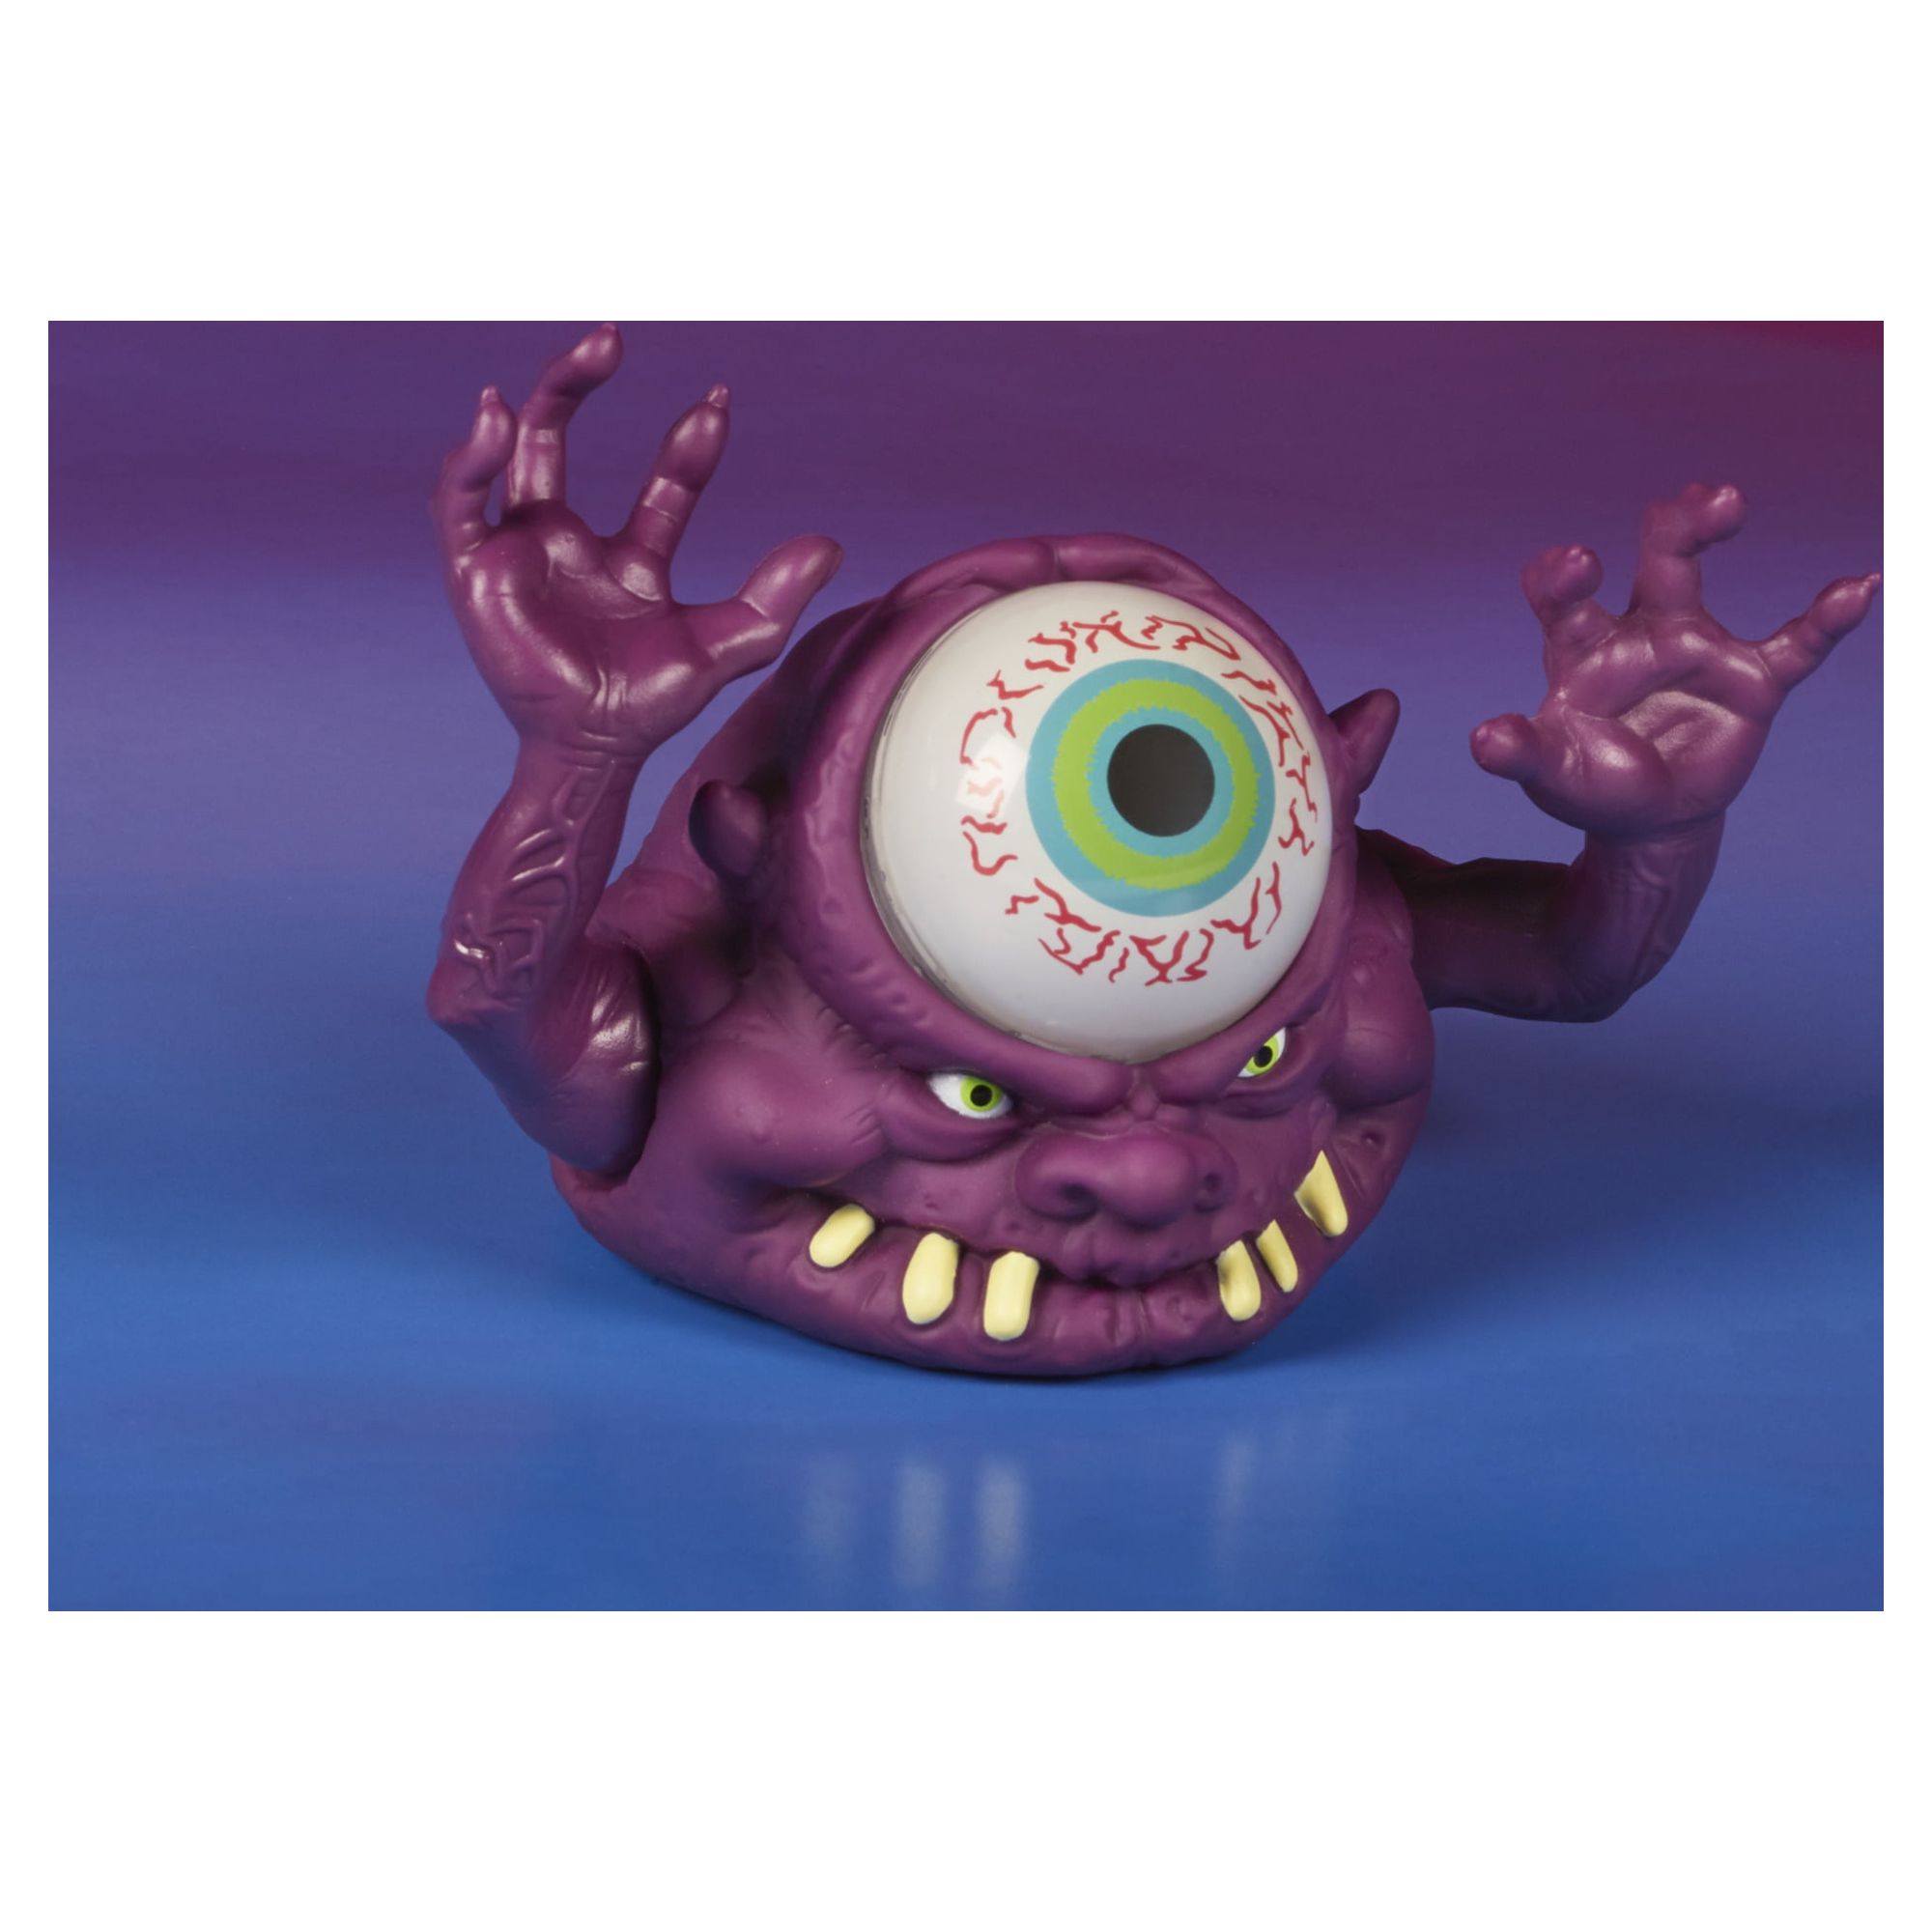 Ghostbusters Kenner Classics The Real Ghostbusters Bug-Eye Ghost Retro Kids Toy Action Figure for Boys and Girls Ages 4 5 6 7 8 and Up - image 3 of 6